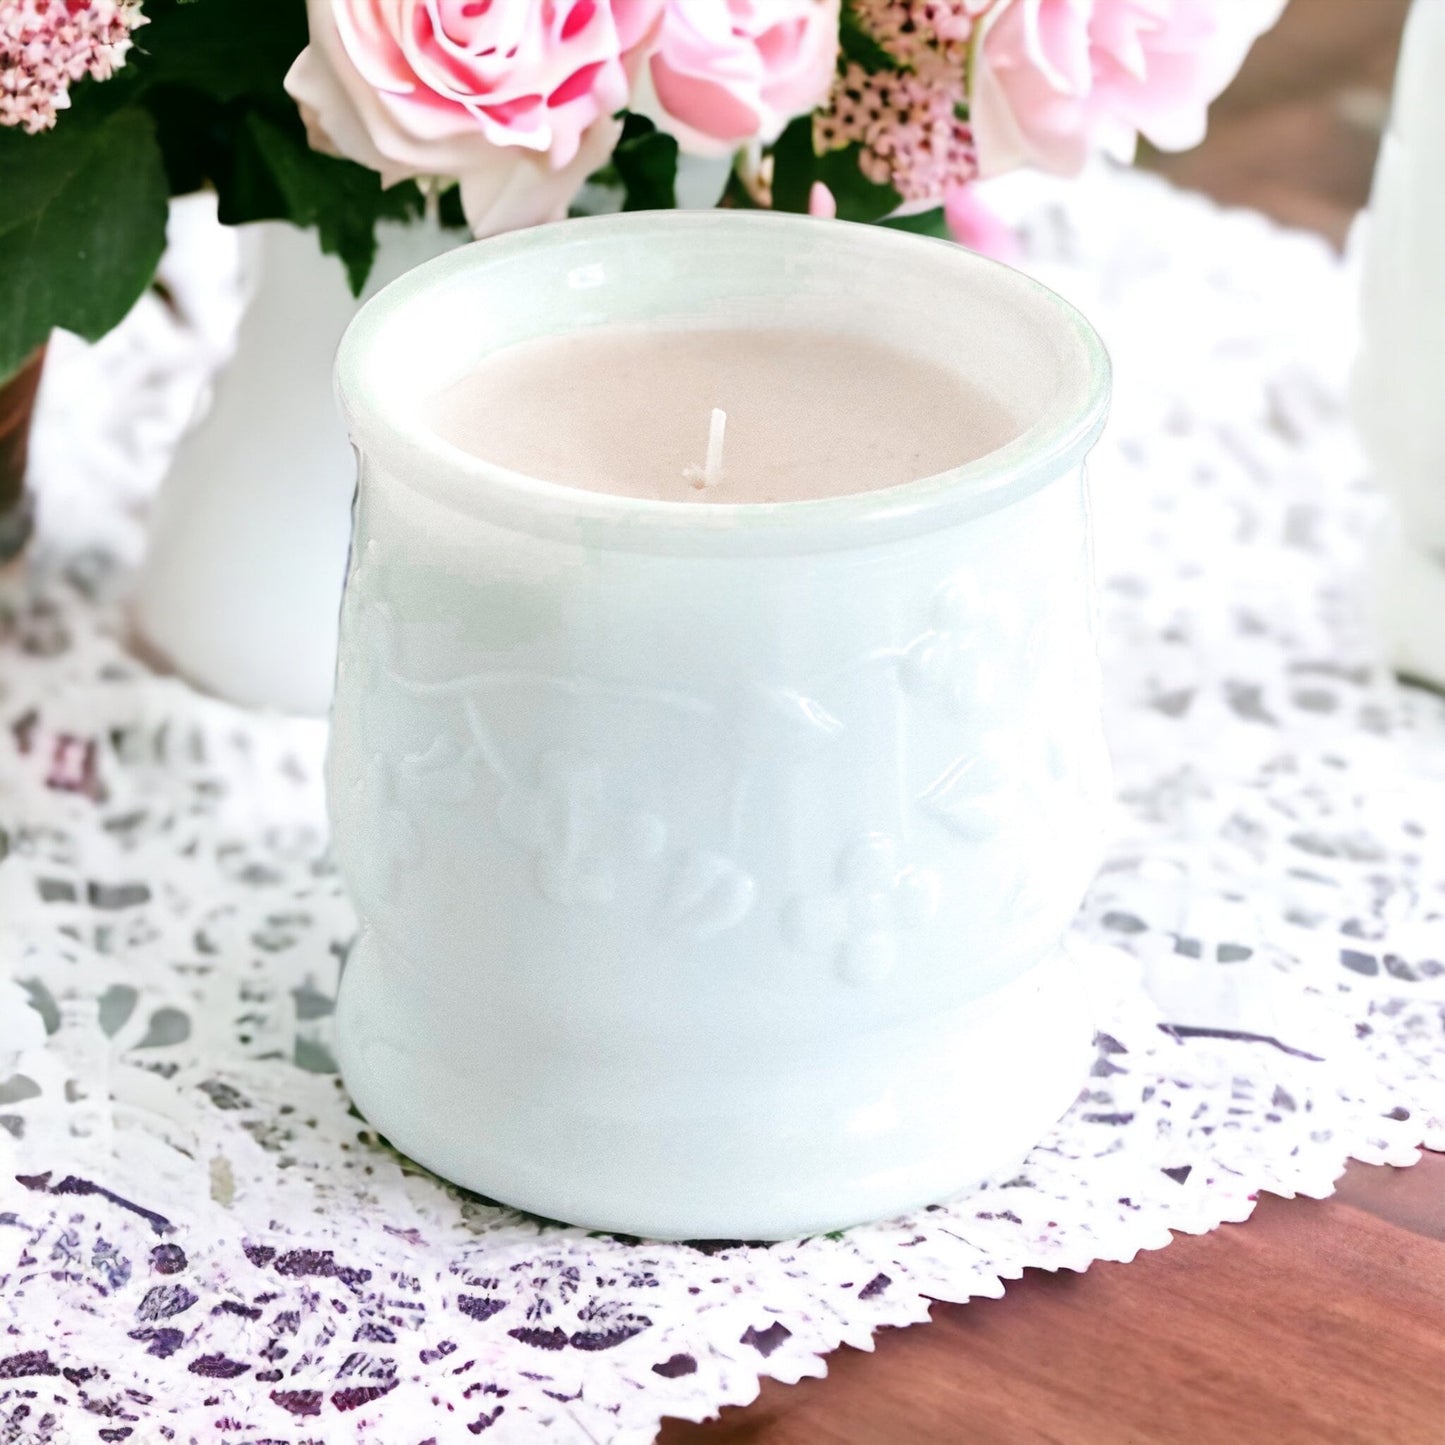 Scented Candle in Vintage Milk Glass Planter